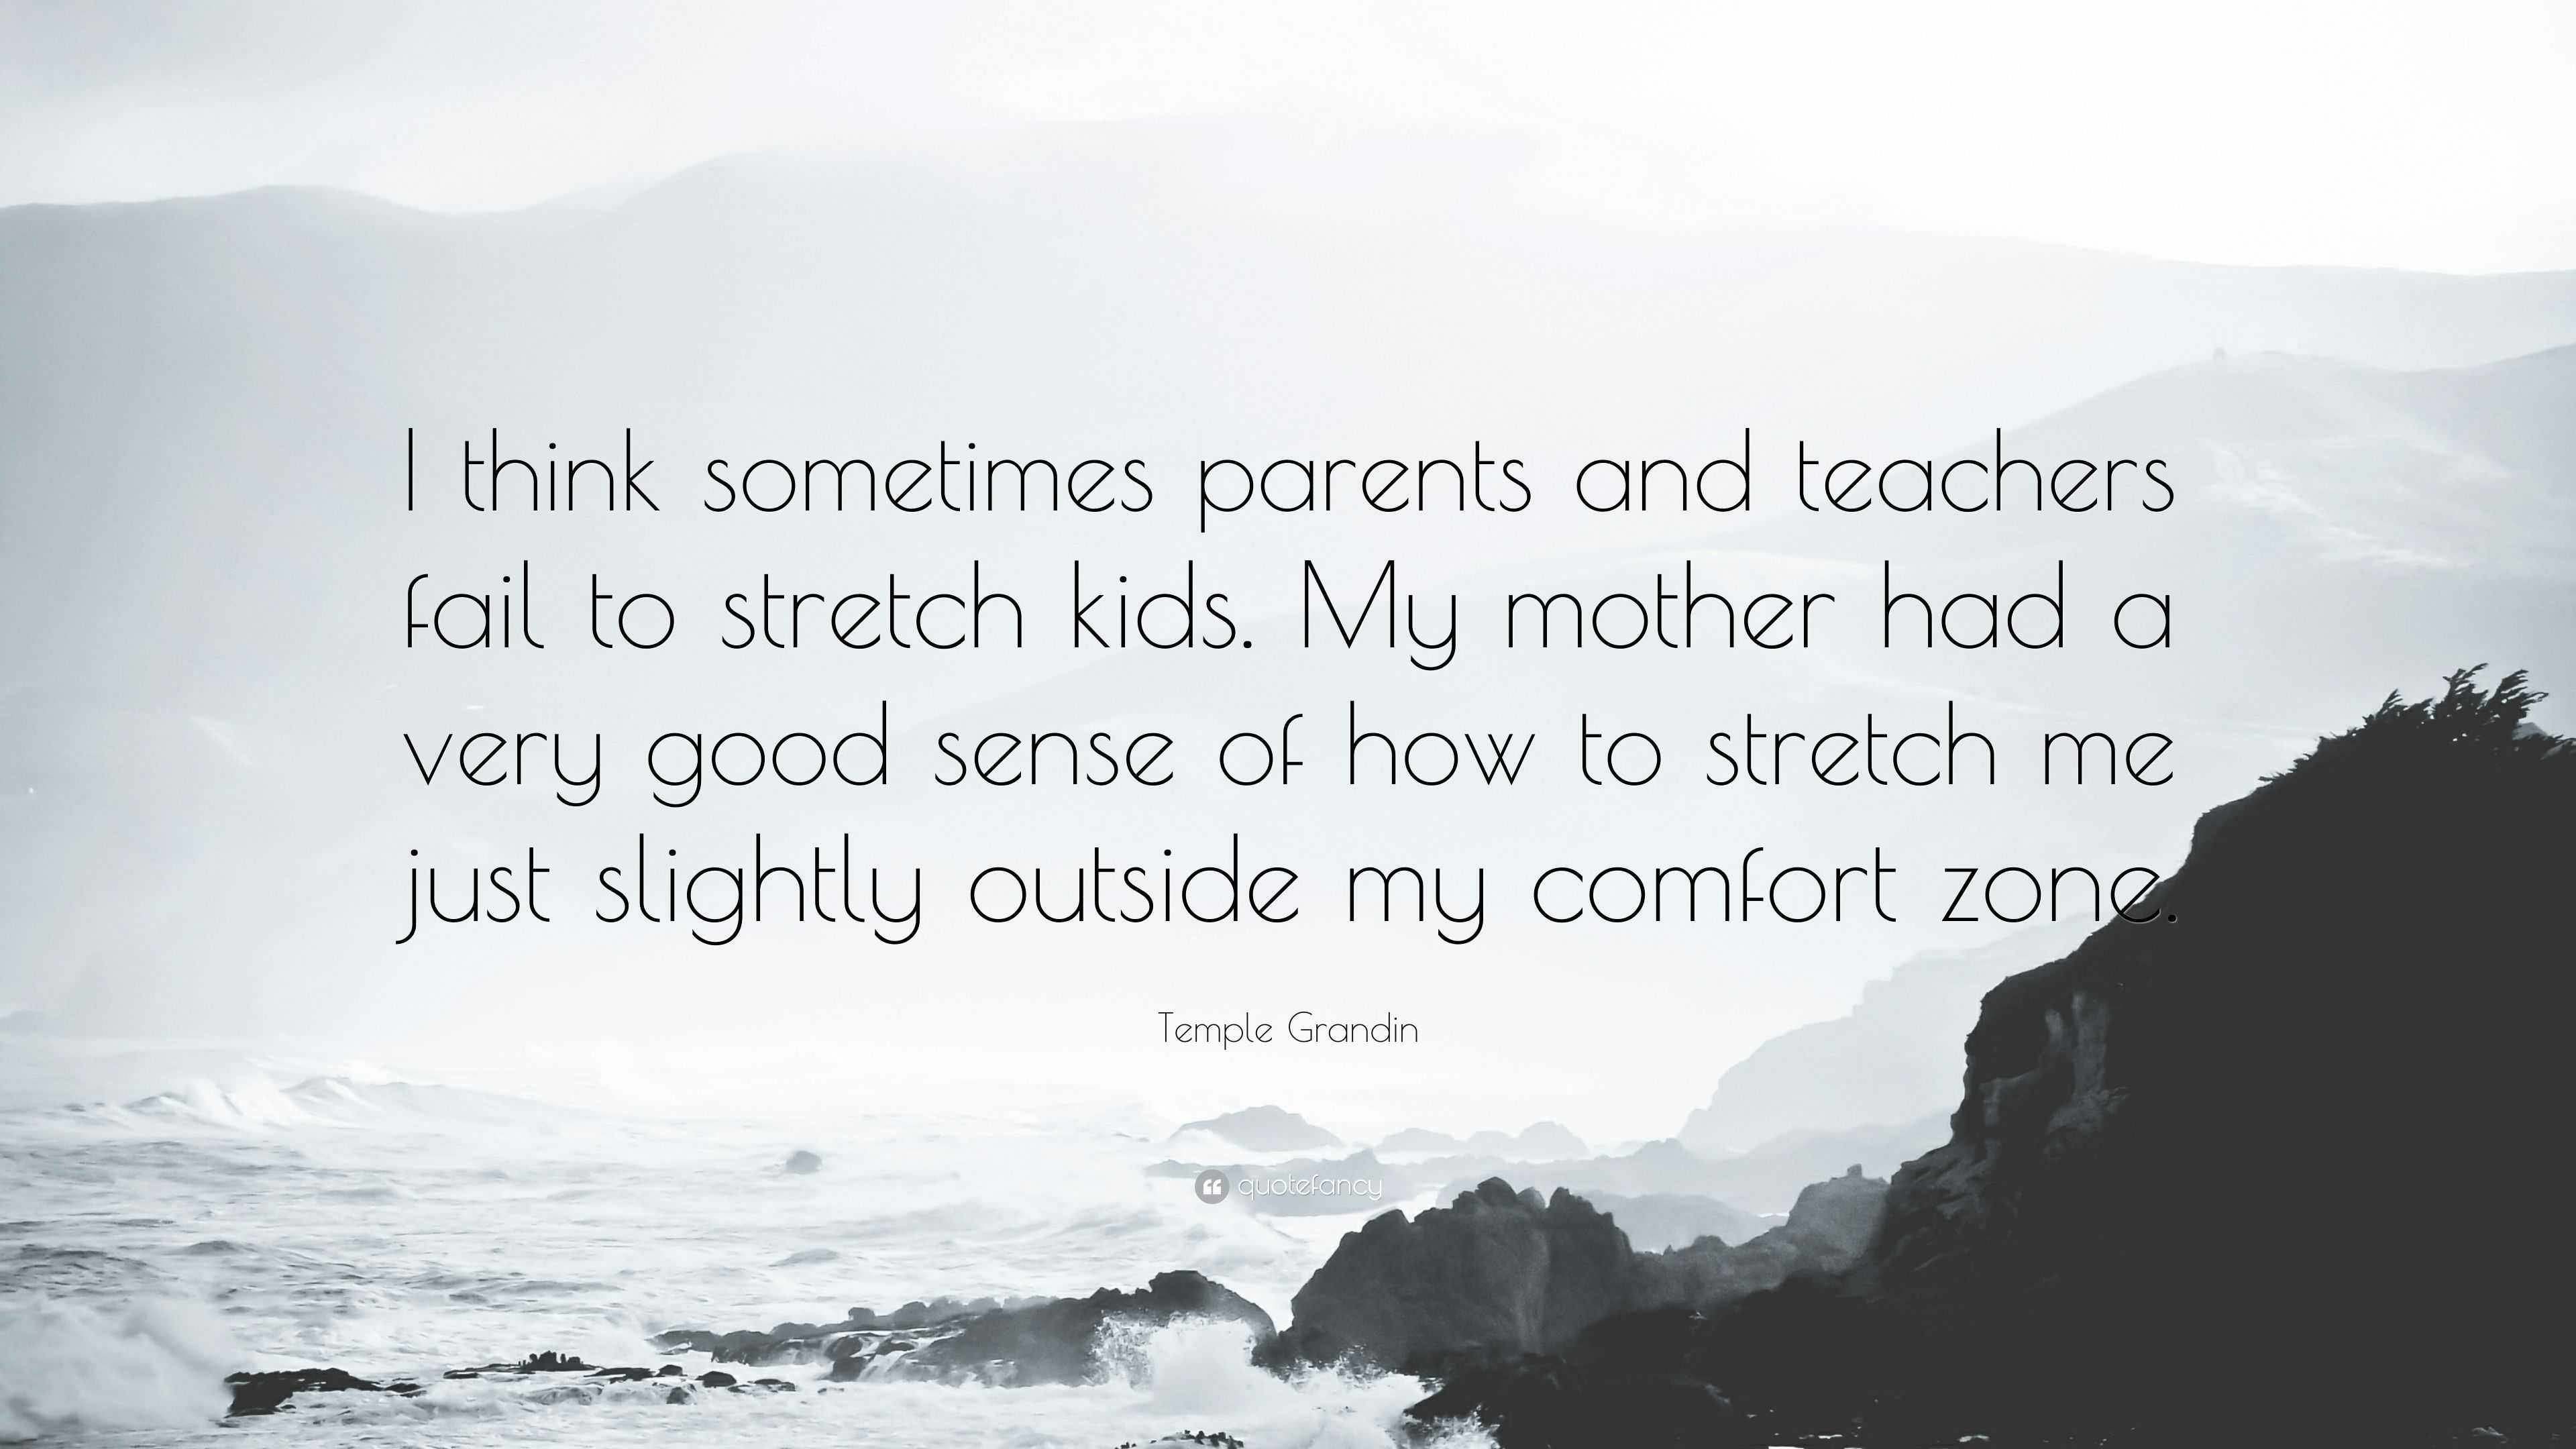 temple grandin quotes about her mother